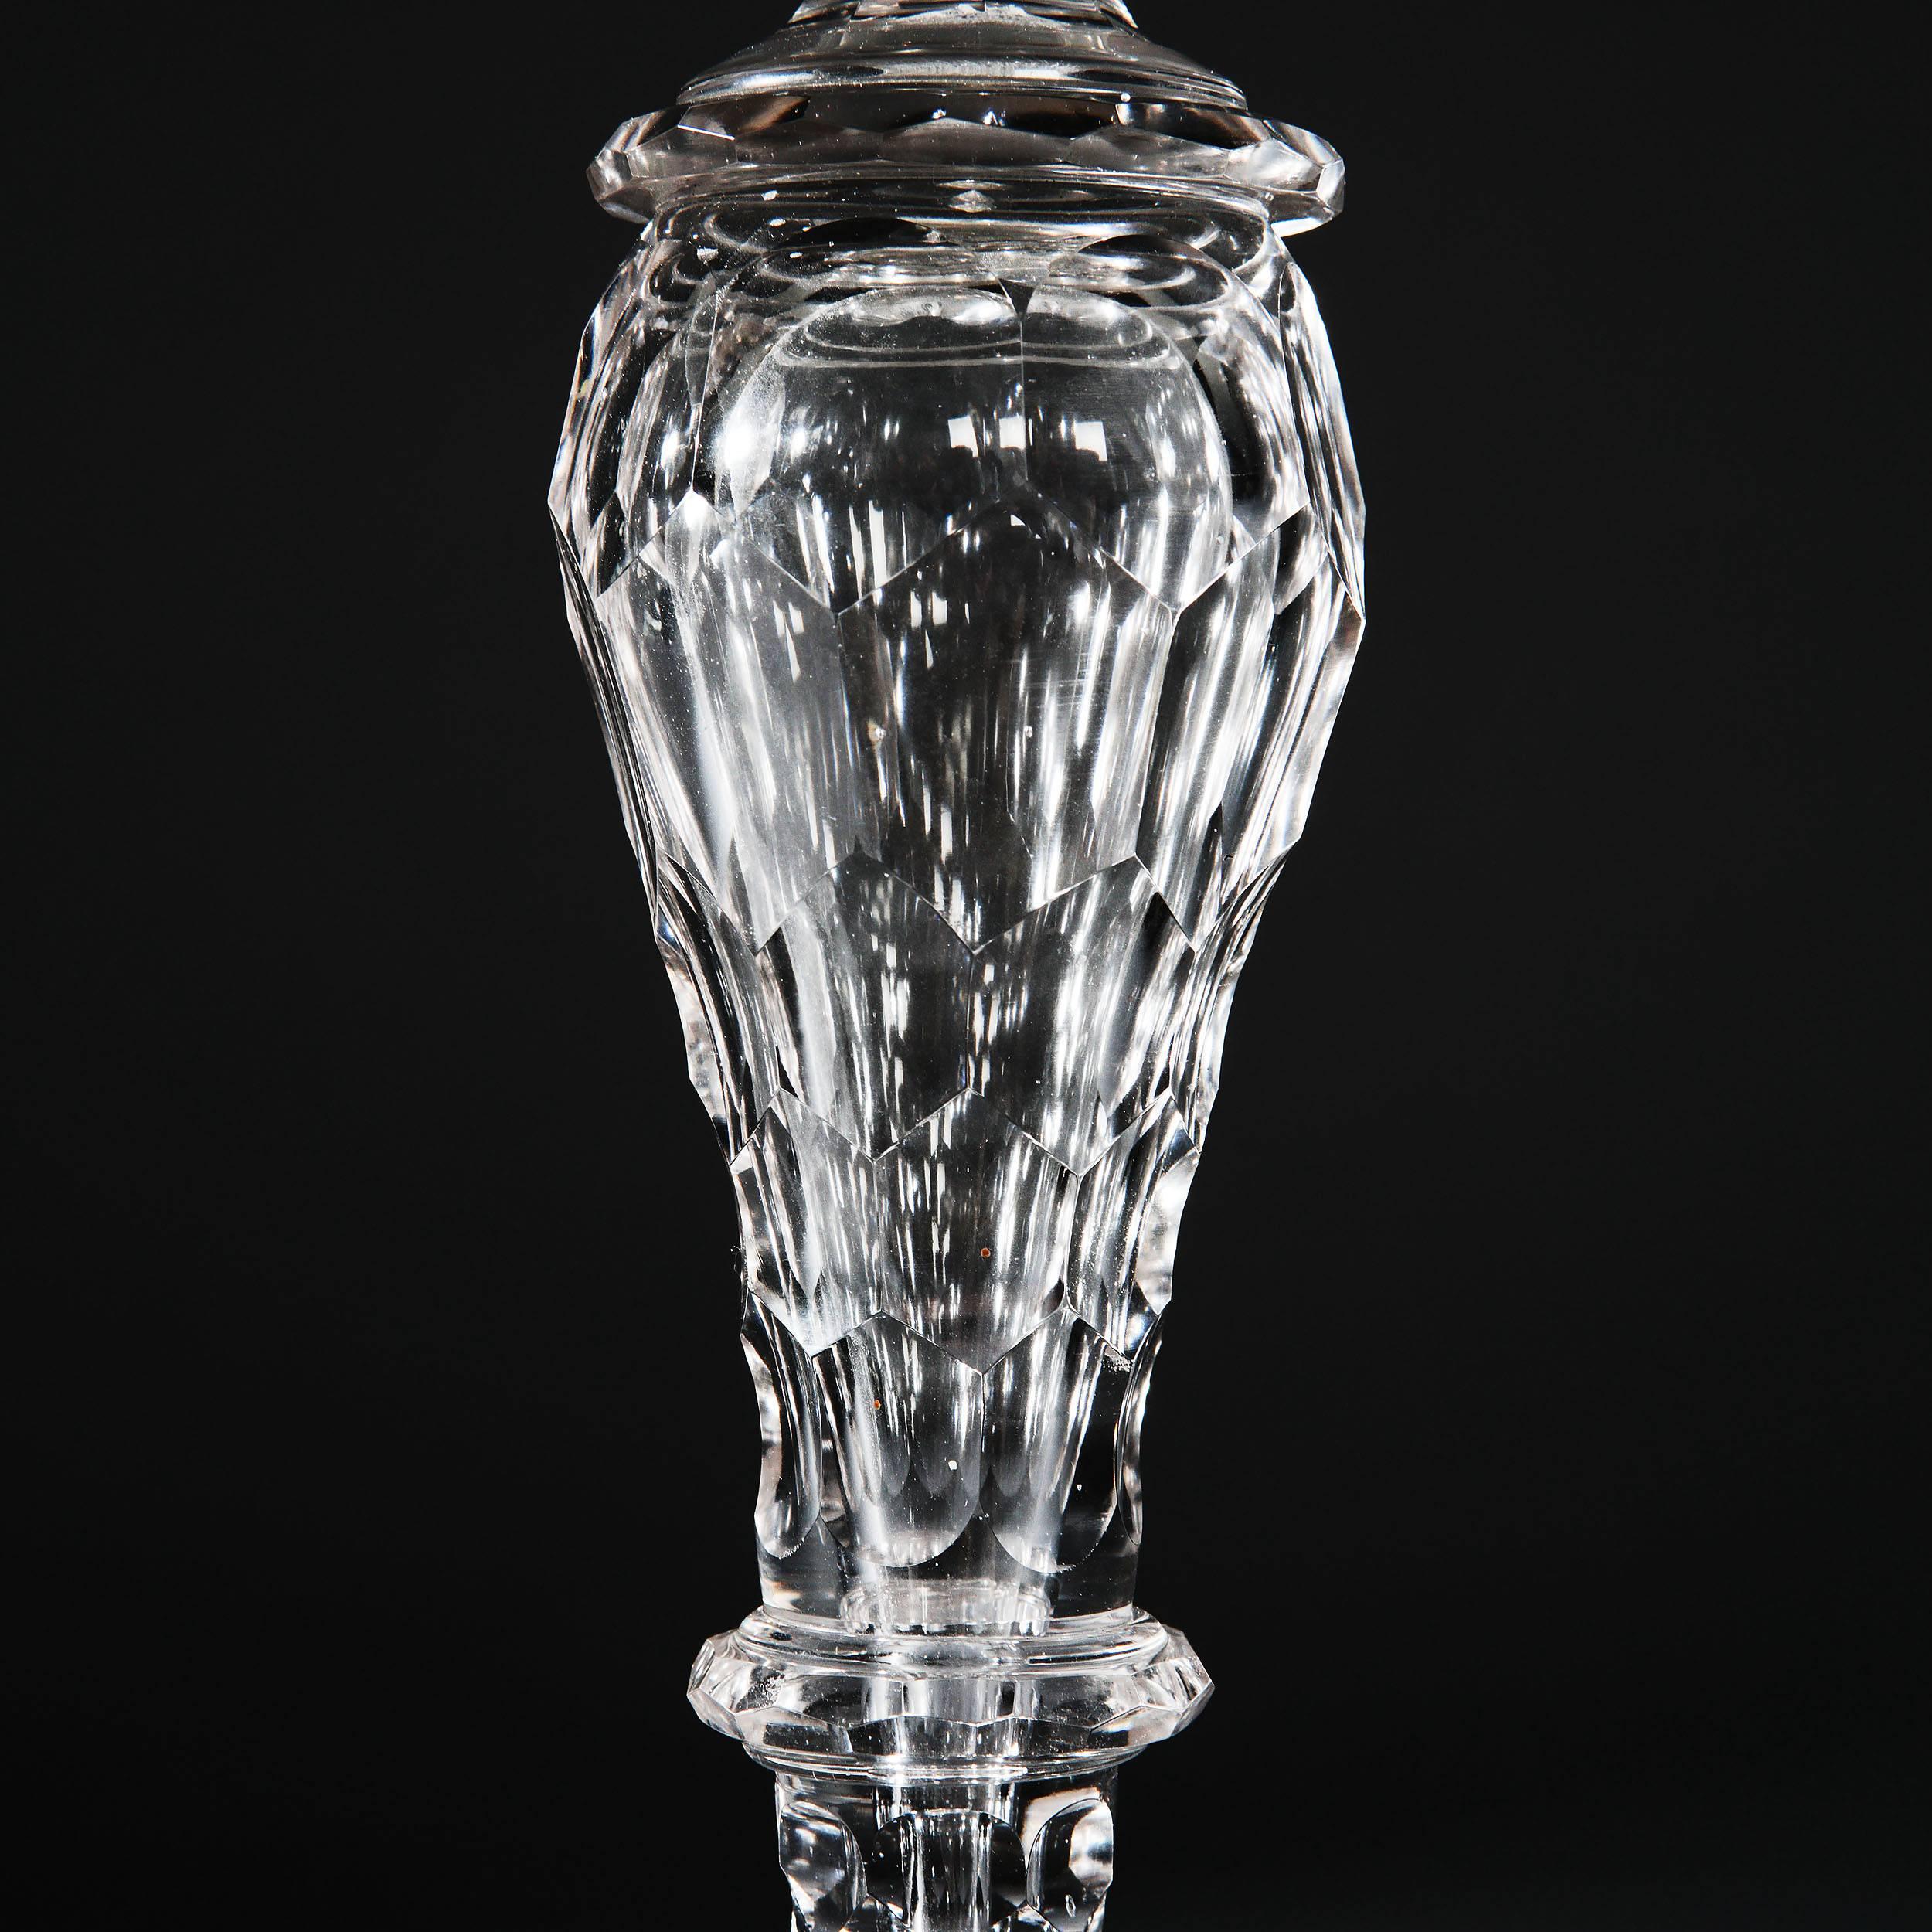 19th Century Fine Glass Candlestick of Large-Scale